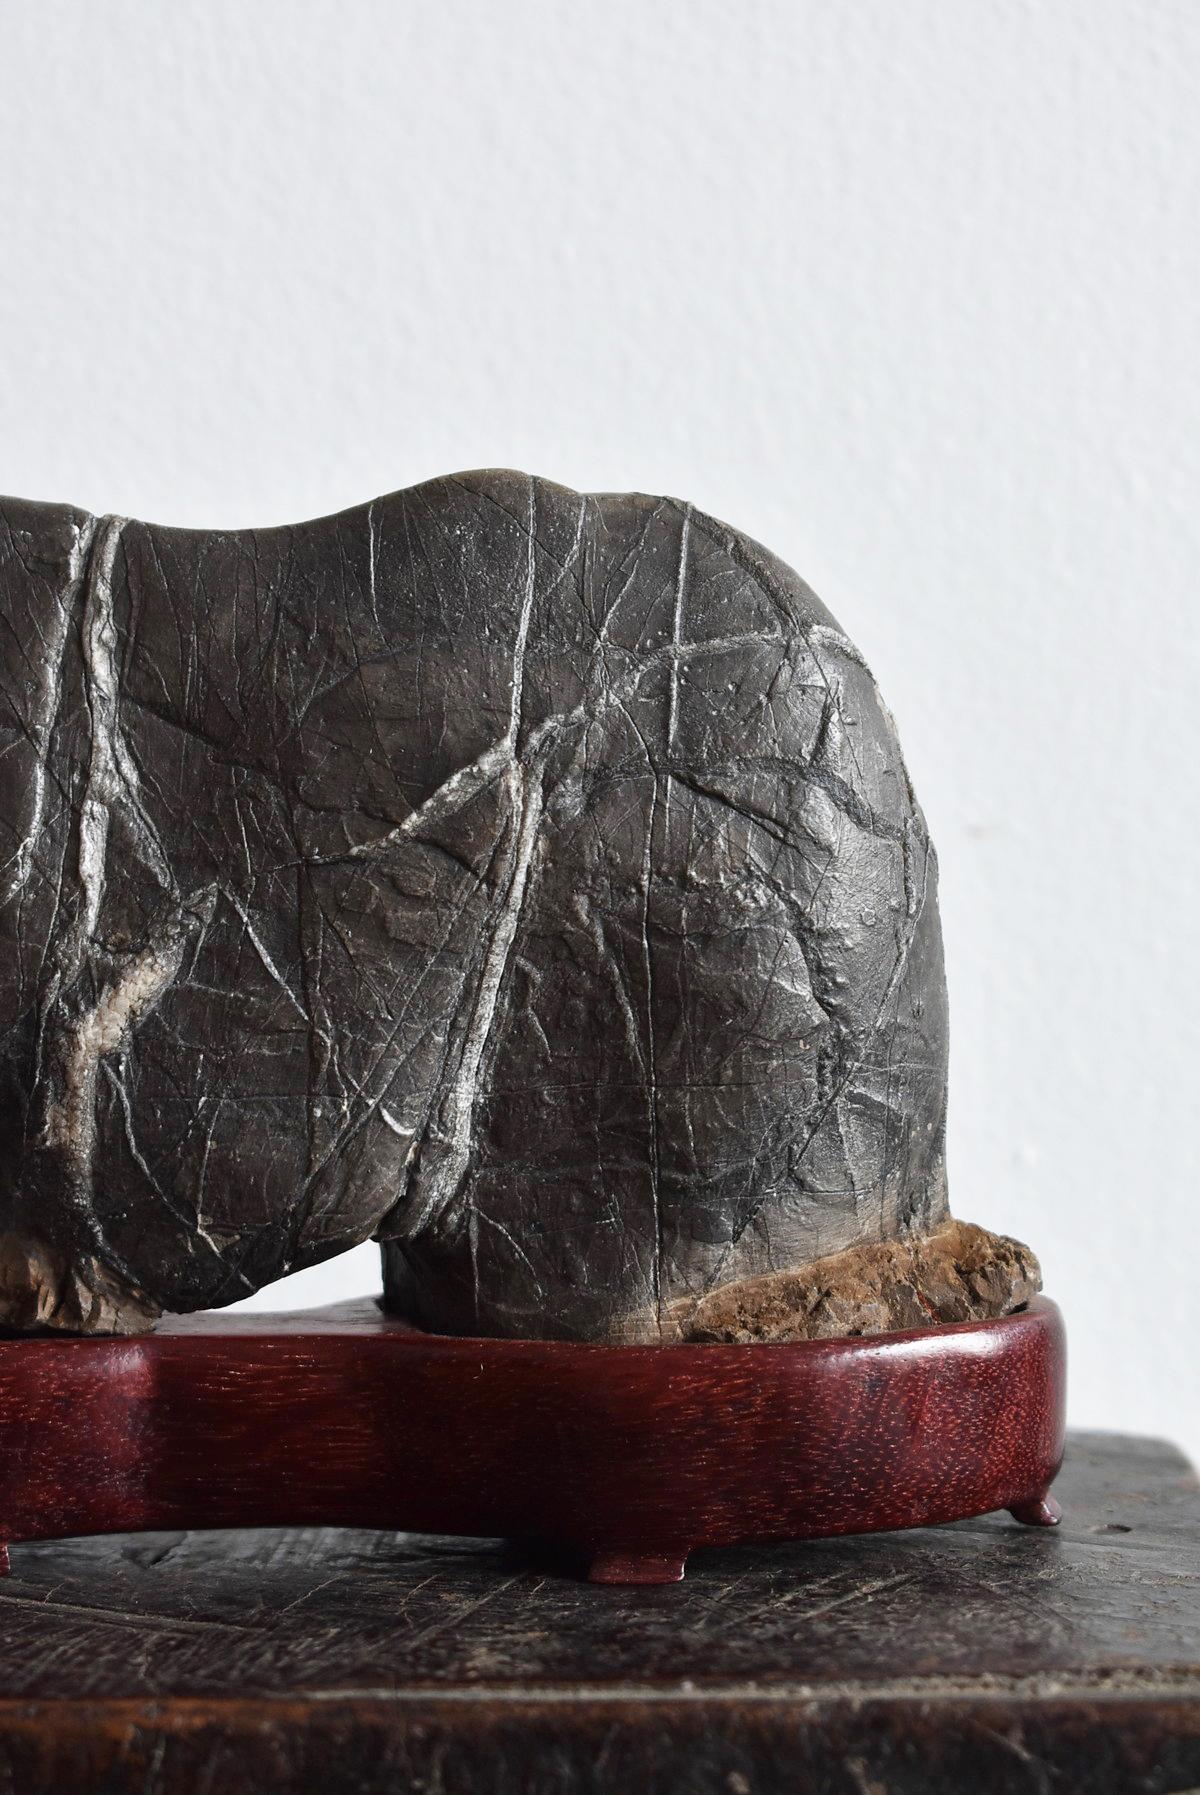 Arts and Crafts Small Japanese Old Stone / Elephant-Shaped Ornamental Stone / Scholar's Objects